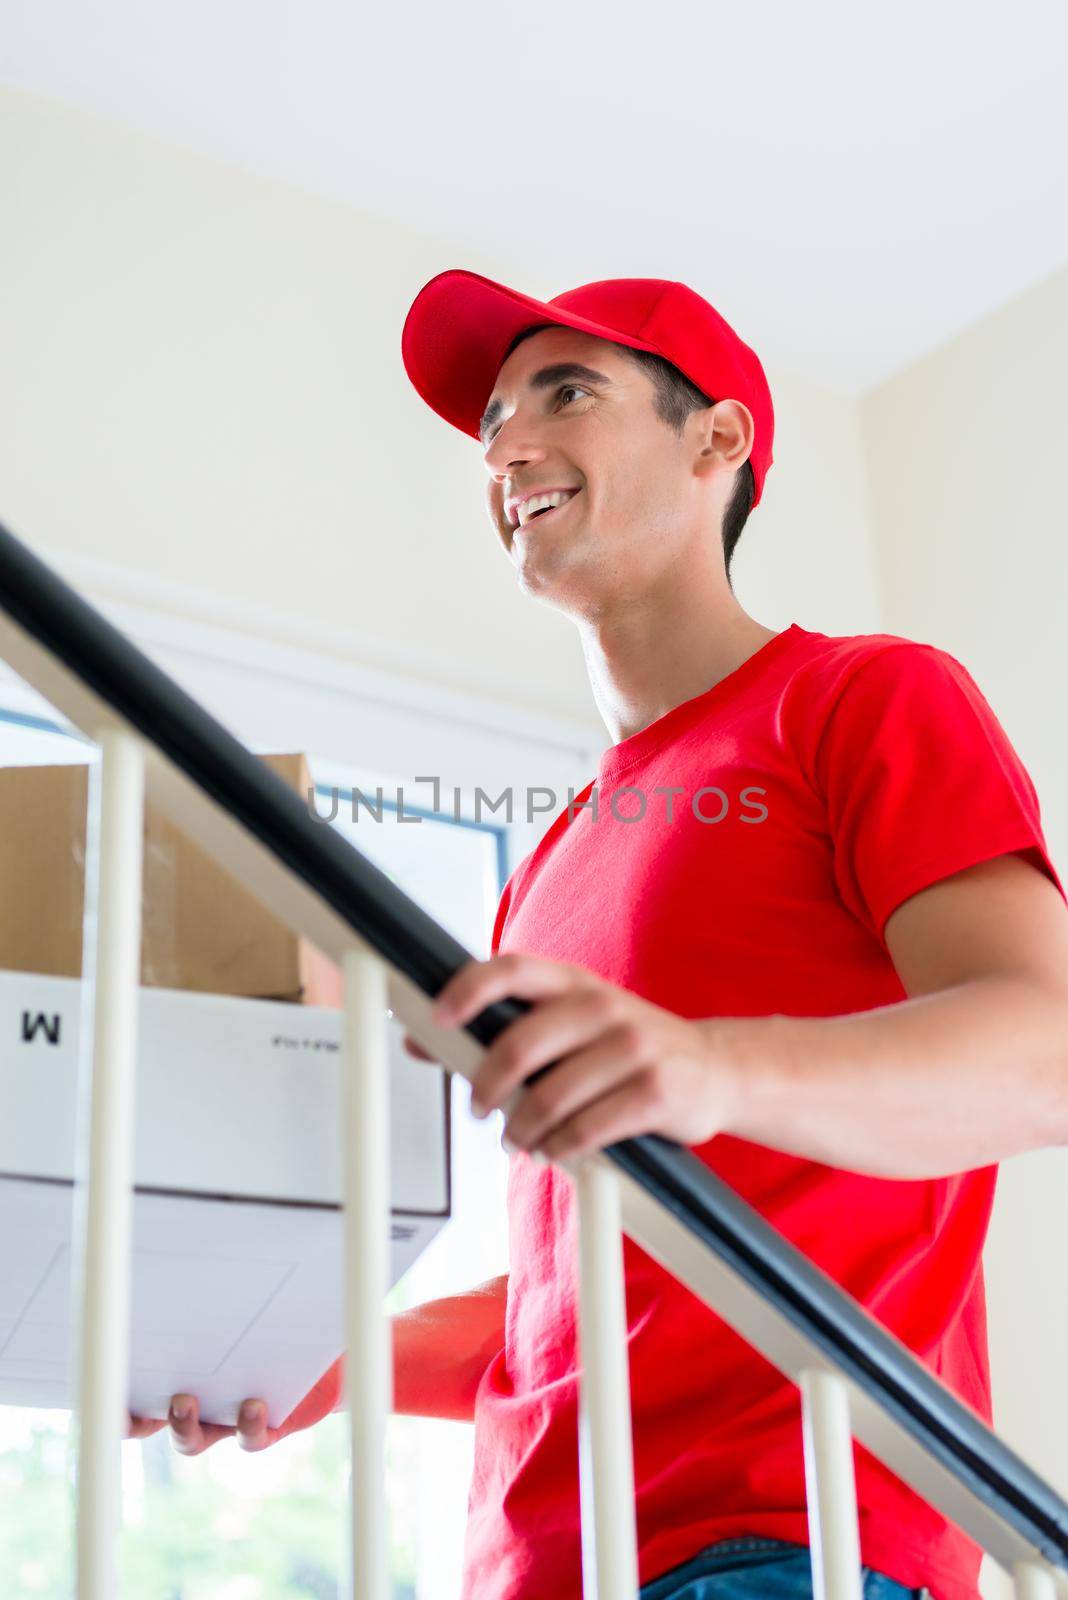 Smiling man in red uniform delivering mail post boxes at home